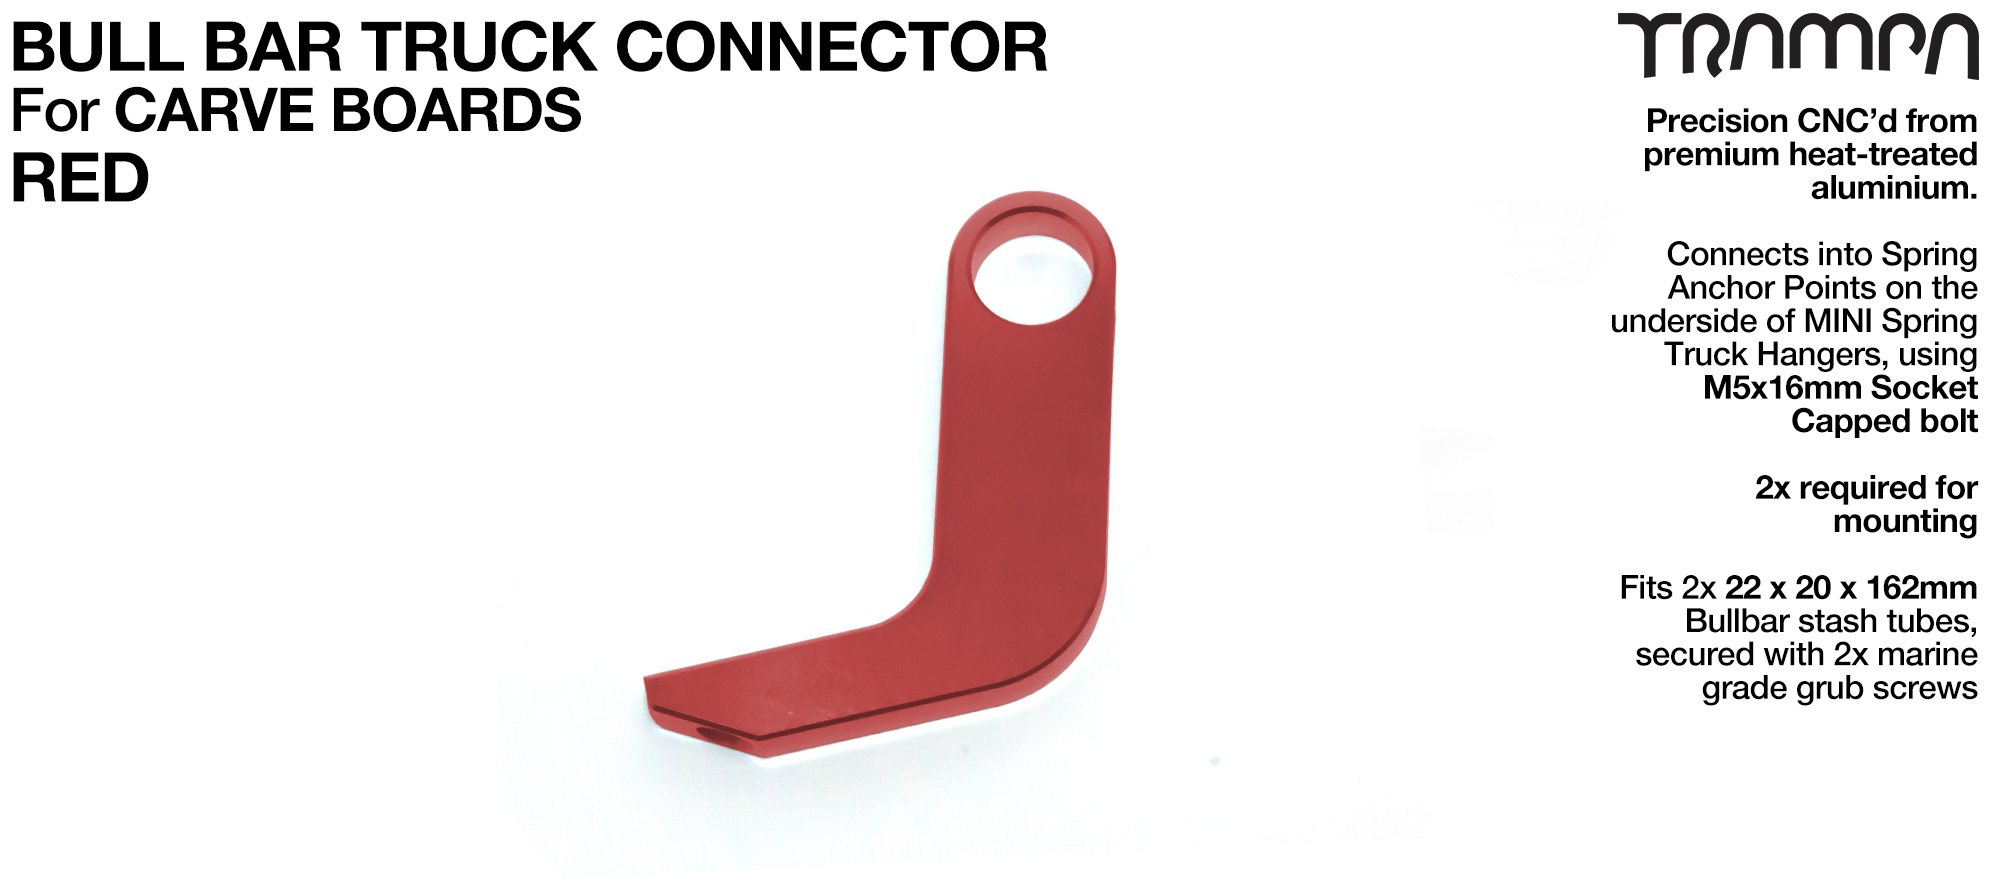 Carve Board Bull Bar connector - RED 